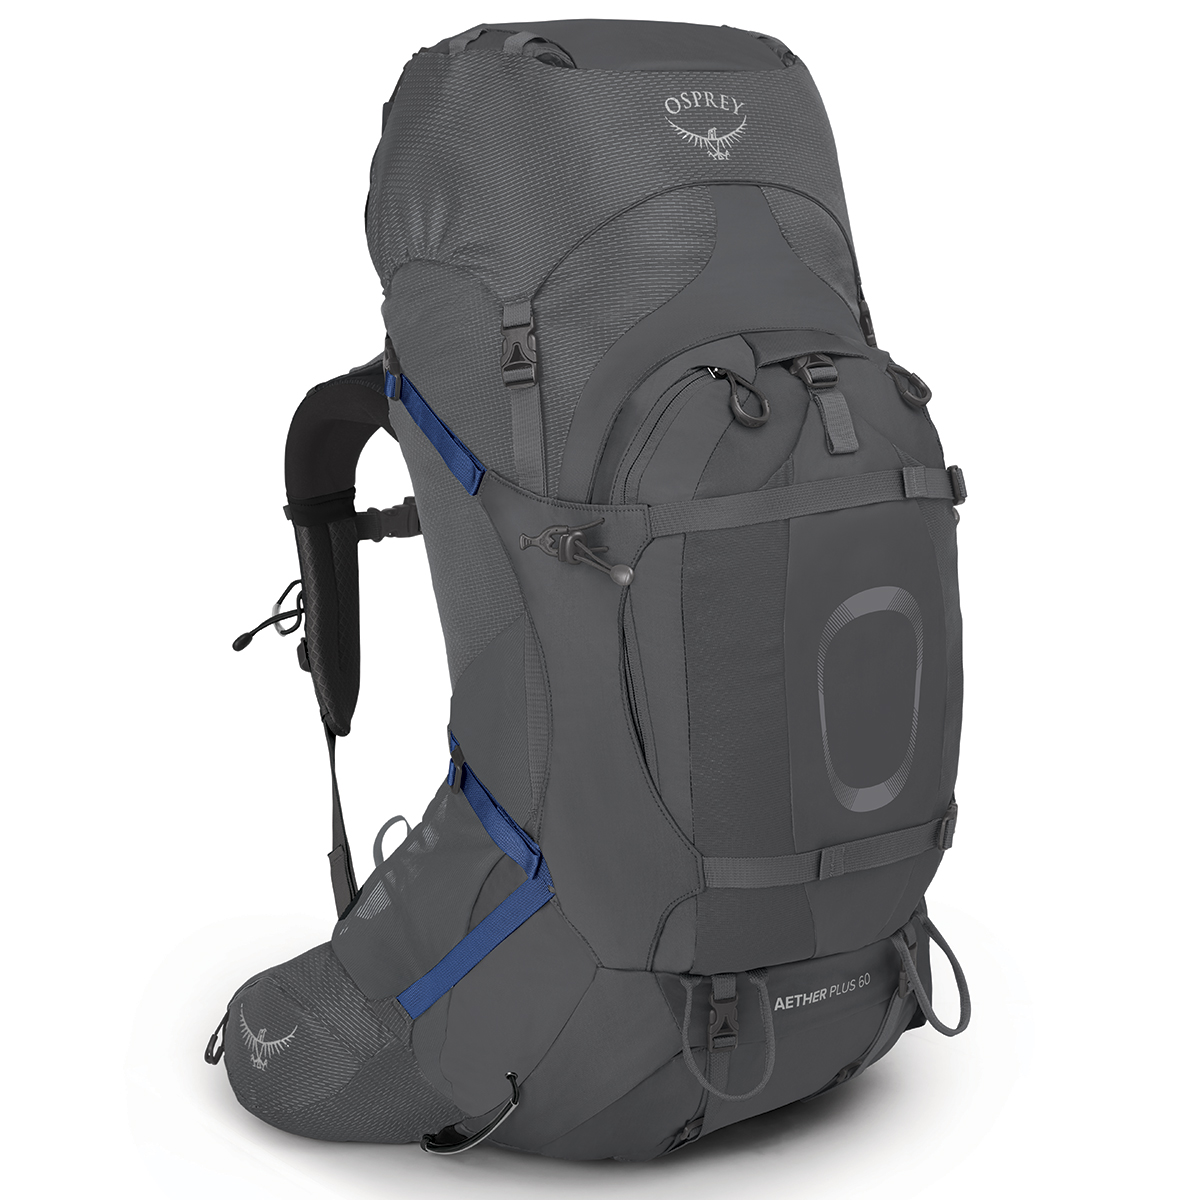 Osprey Aether Plus 60 Pack